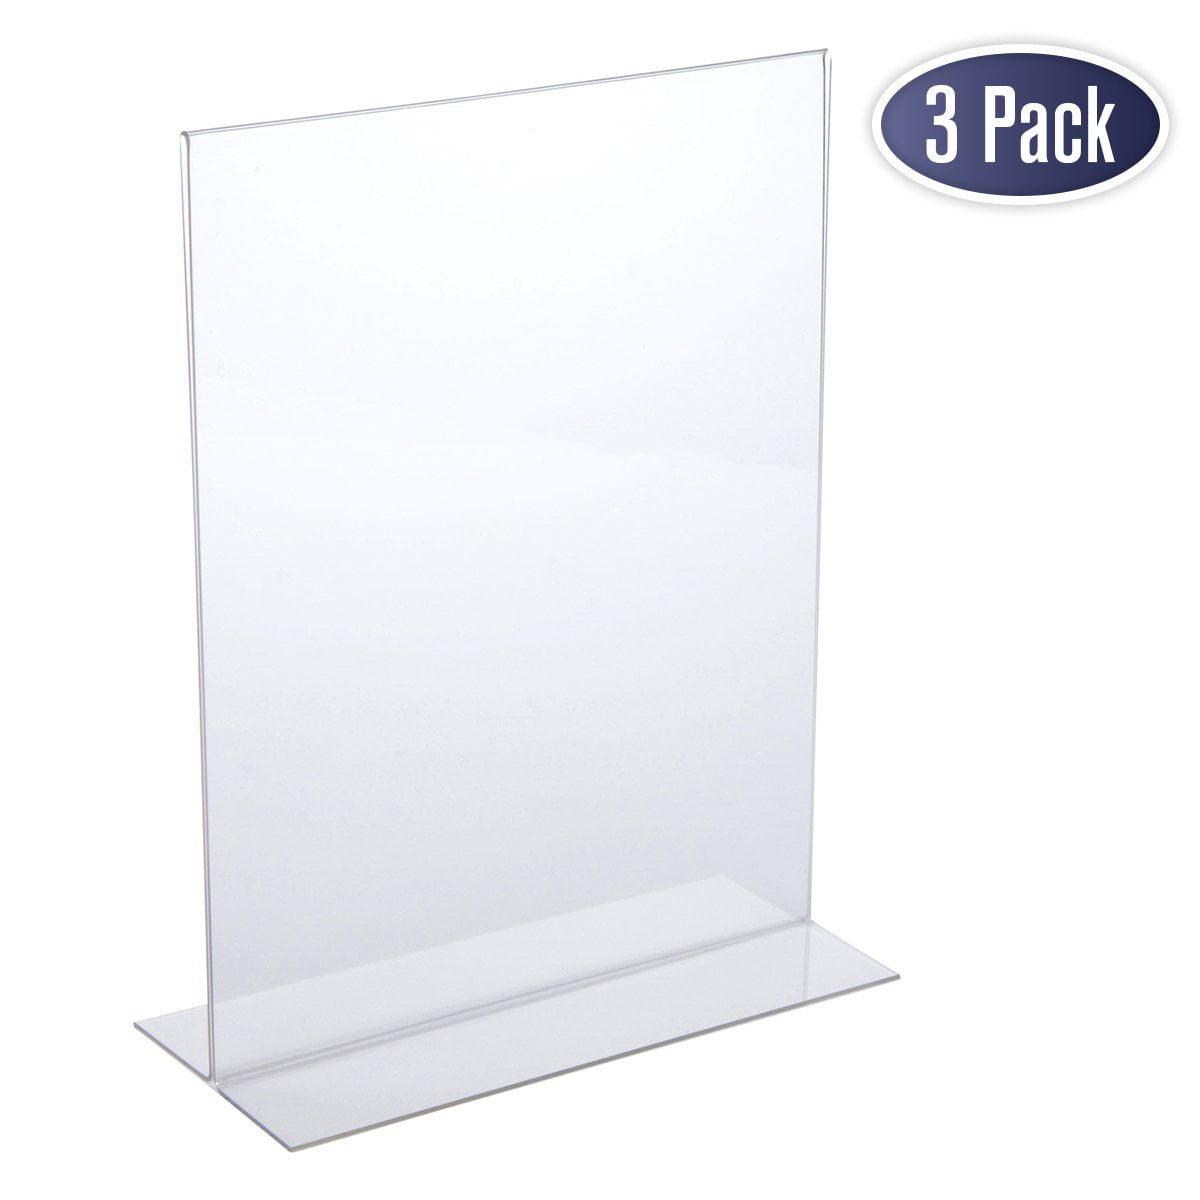 MUGBGGYUE Acrylic Transparent Display Shelf L Shape Table Top Display Stand,Jewelry Display Stand for Restaurants Promotions Classroom Photo Frames 